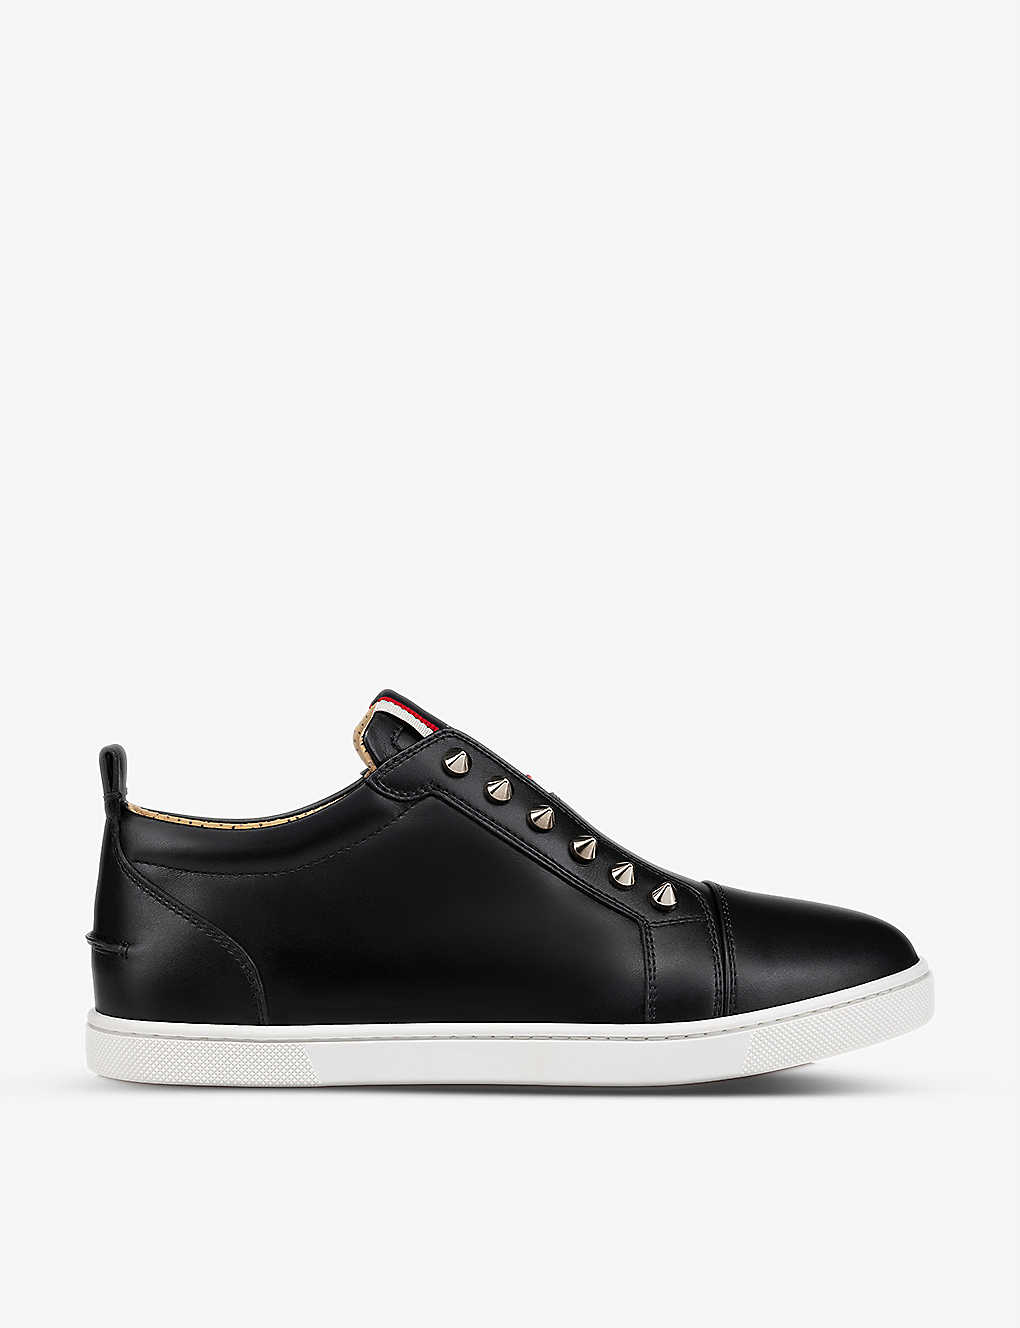 Shop Christian Louboutin Womens Black F.a.v Fique A Vontade Studded Leather Low-top Trainers